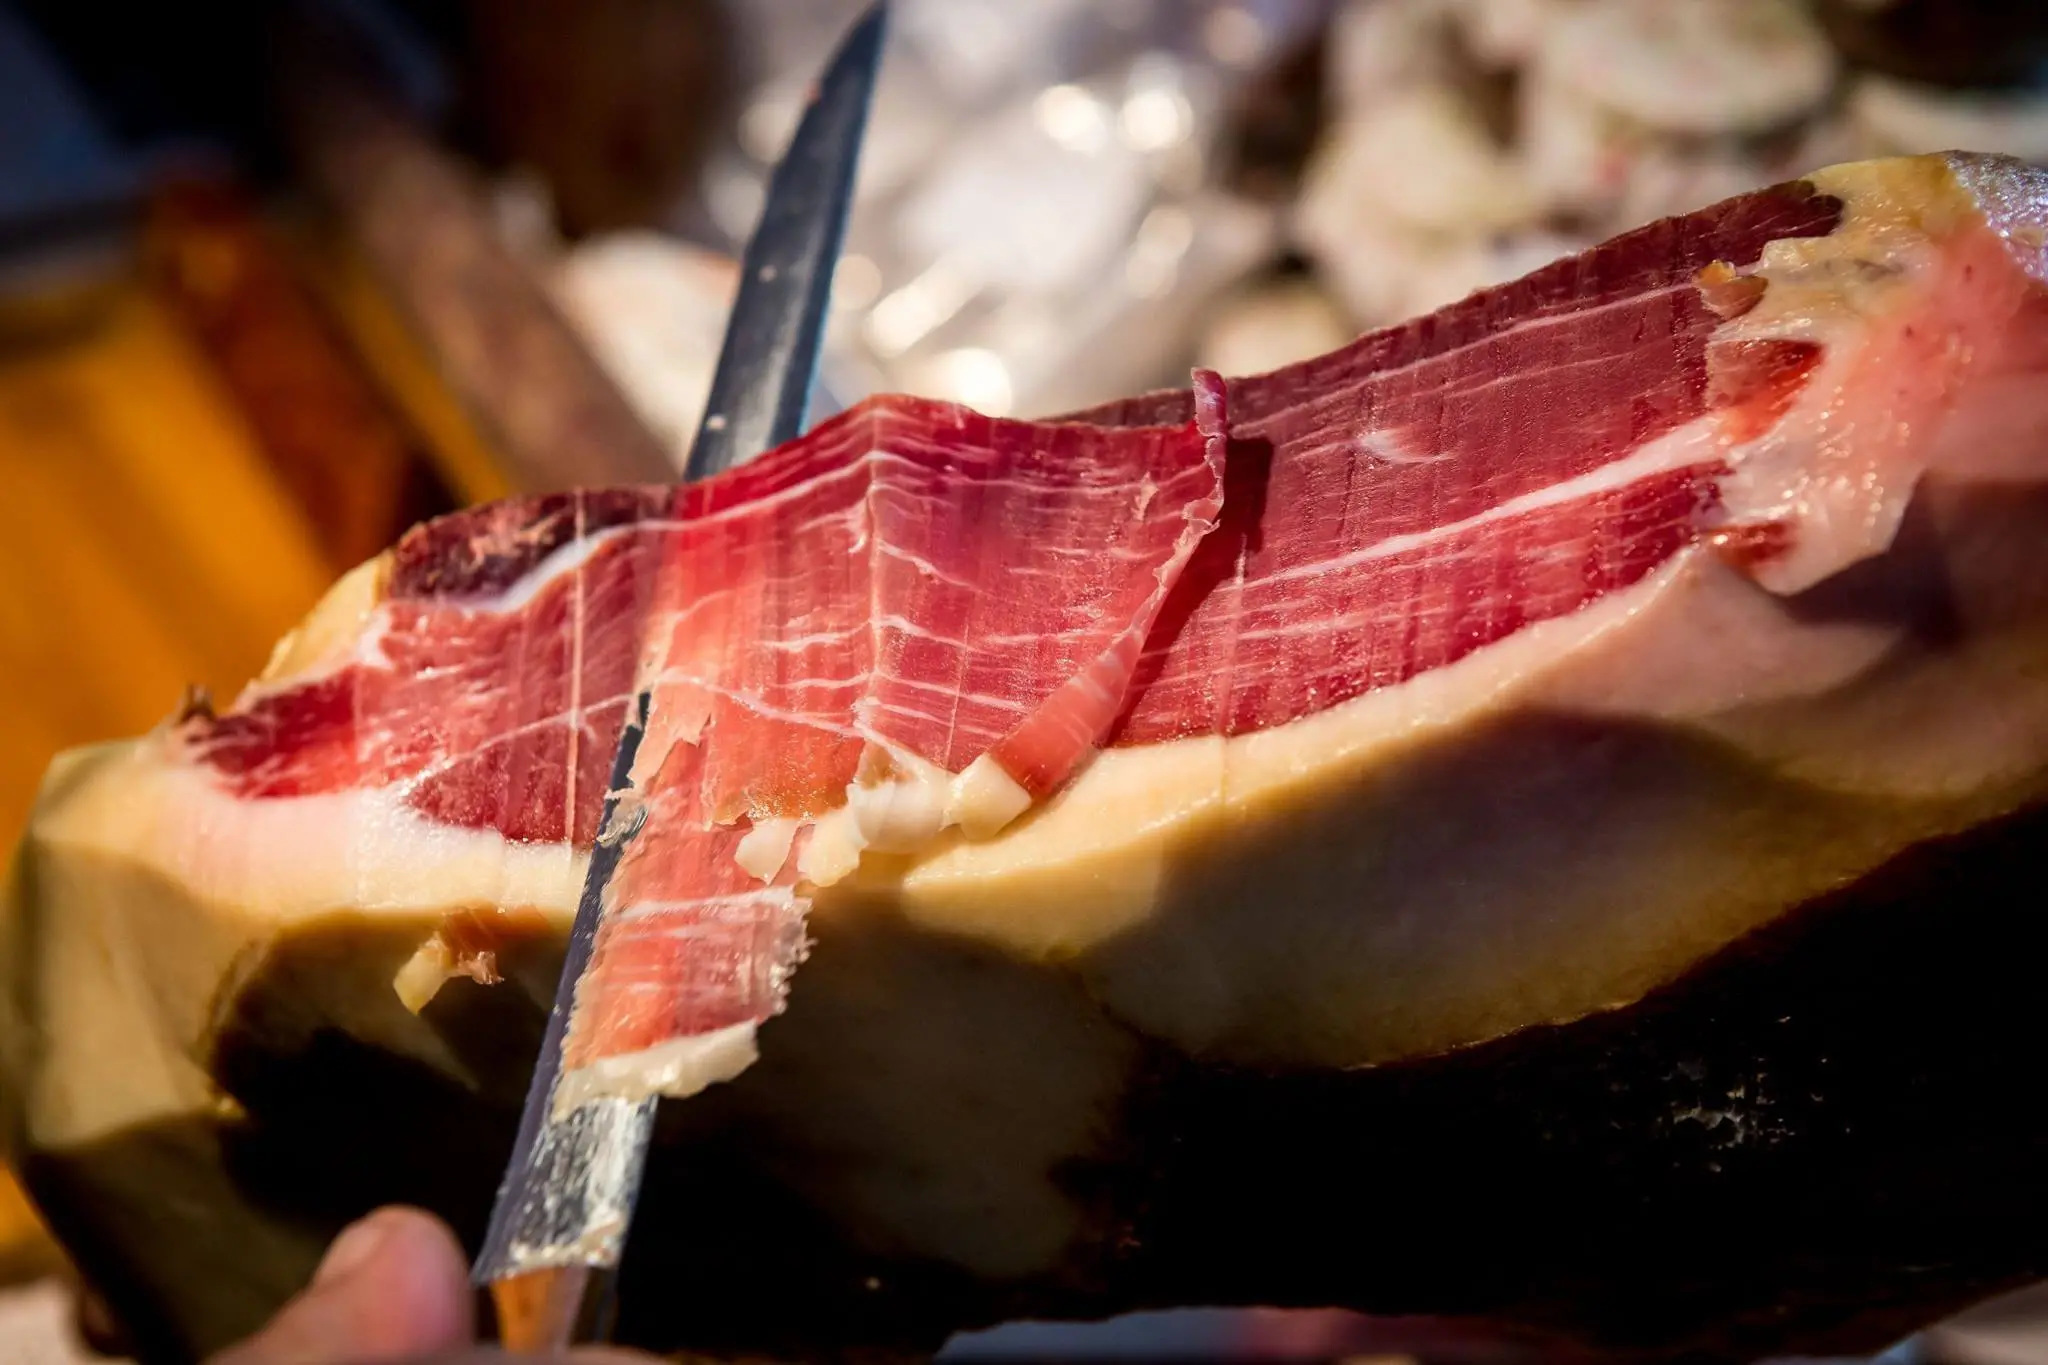 Prosciutto being cut into thin slices